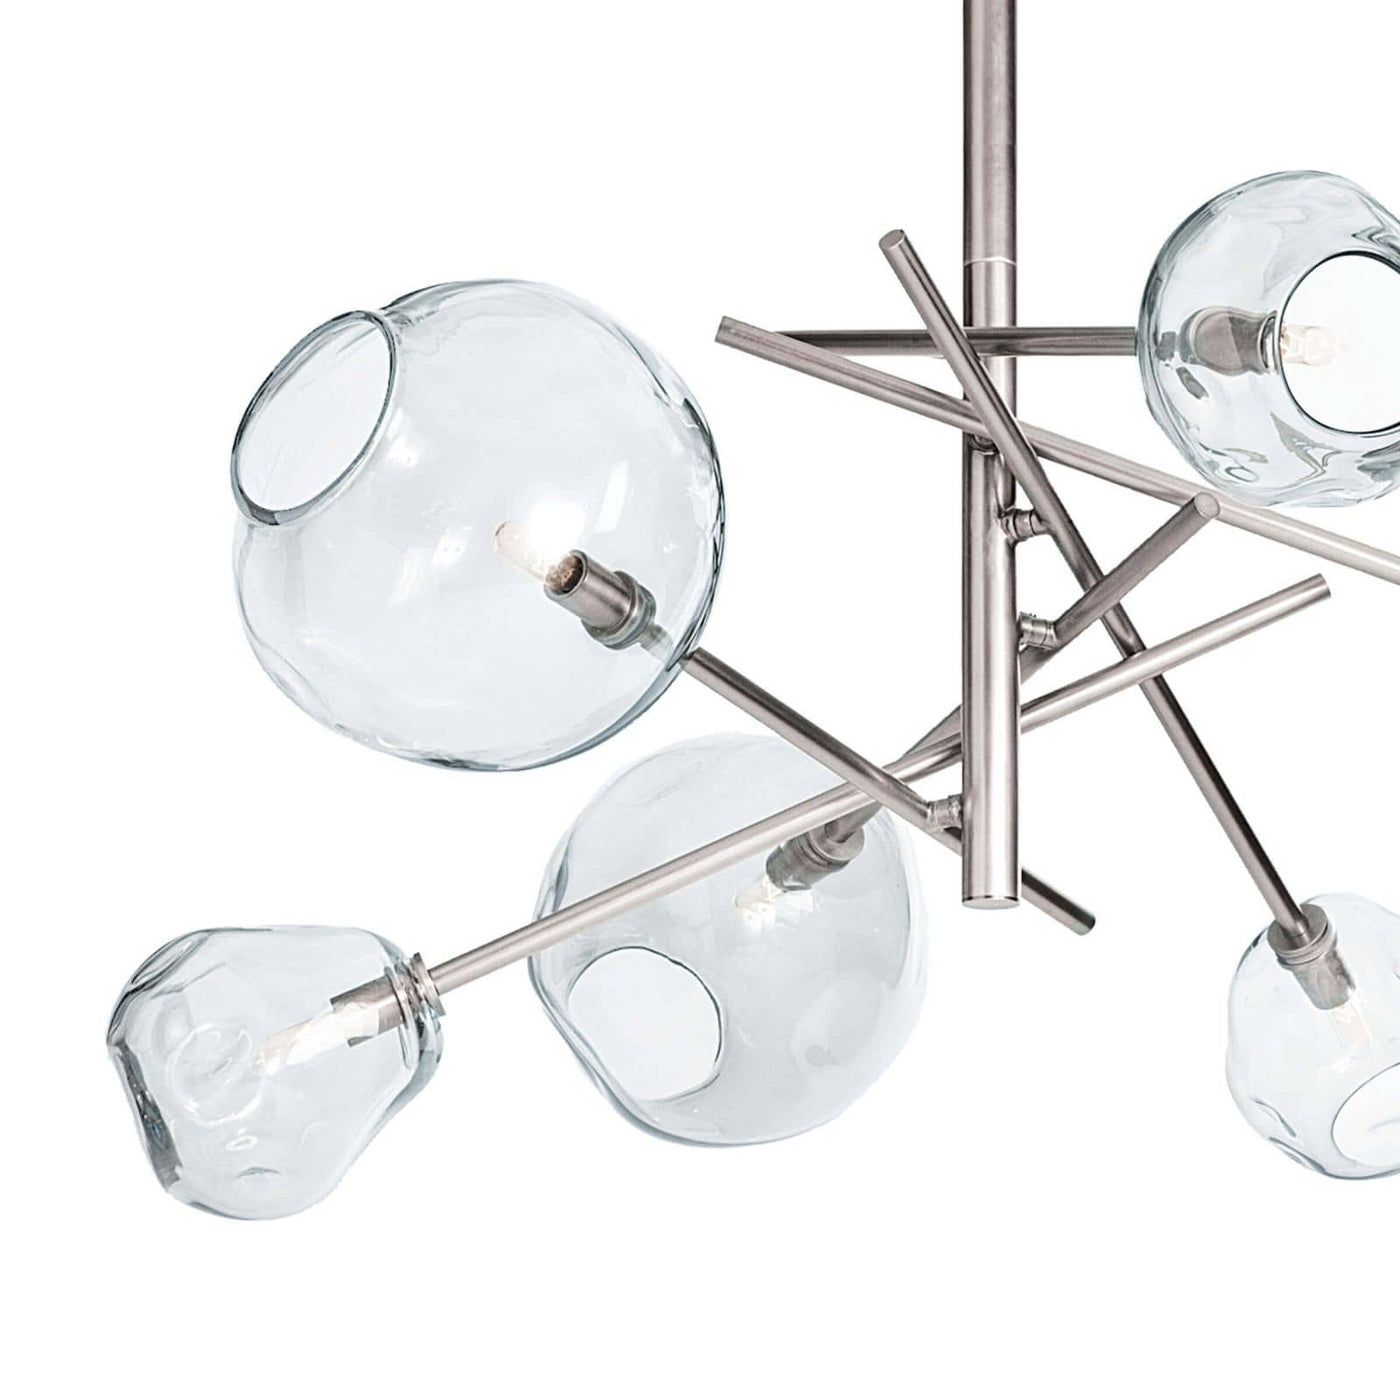 MOLTEN CHANDELIER WITH CLEAR GLASS & POLISHED NICKEL